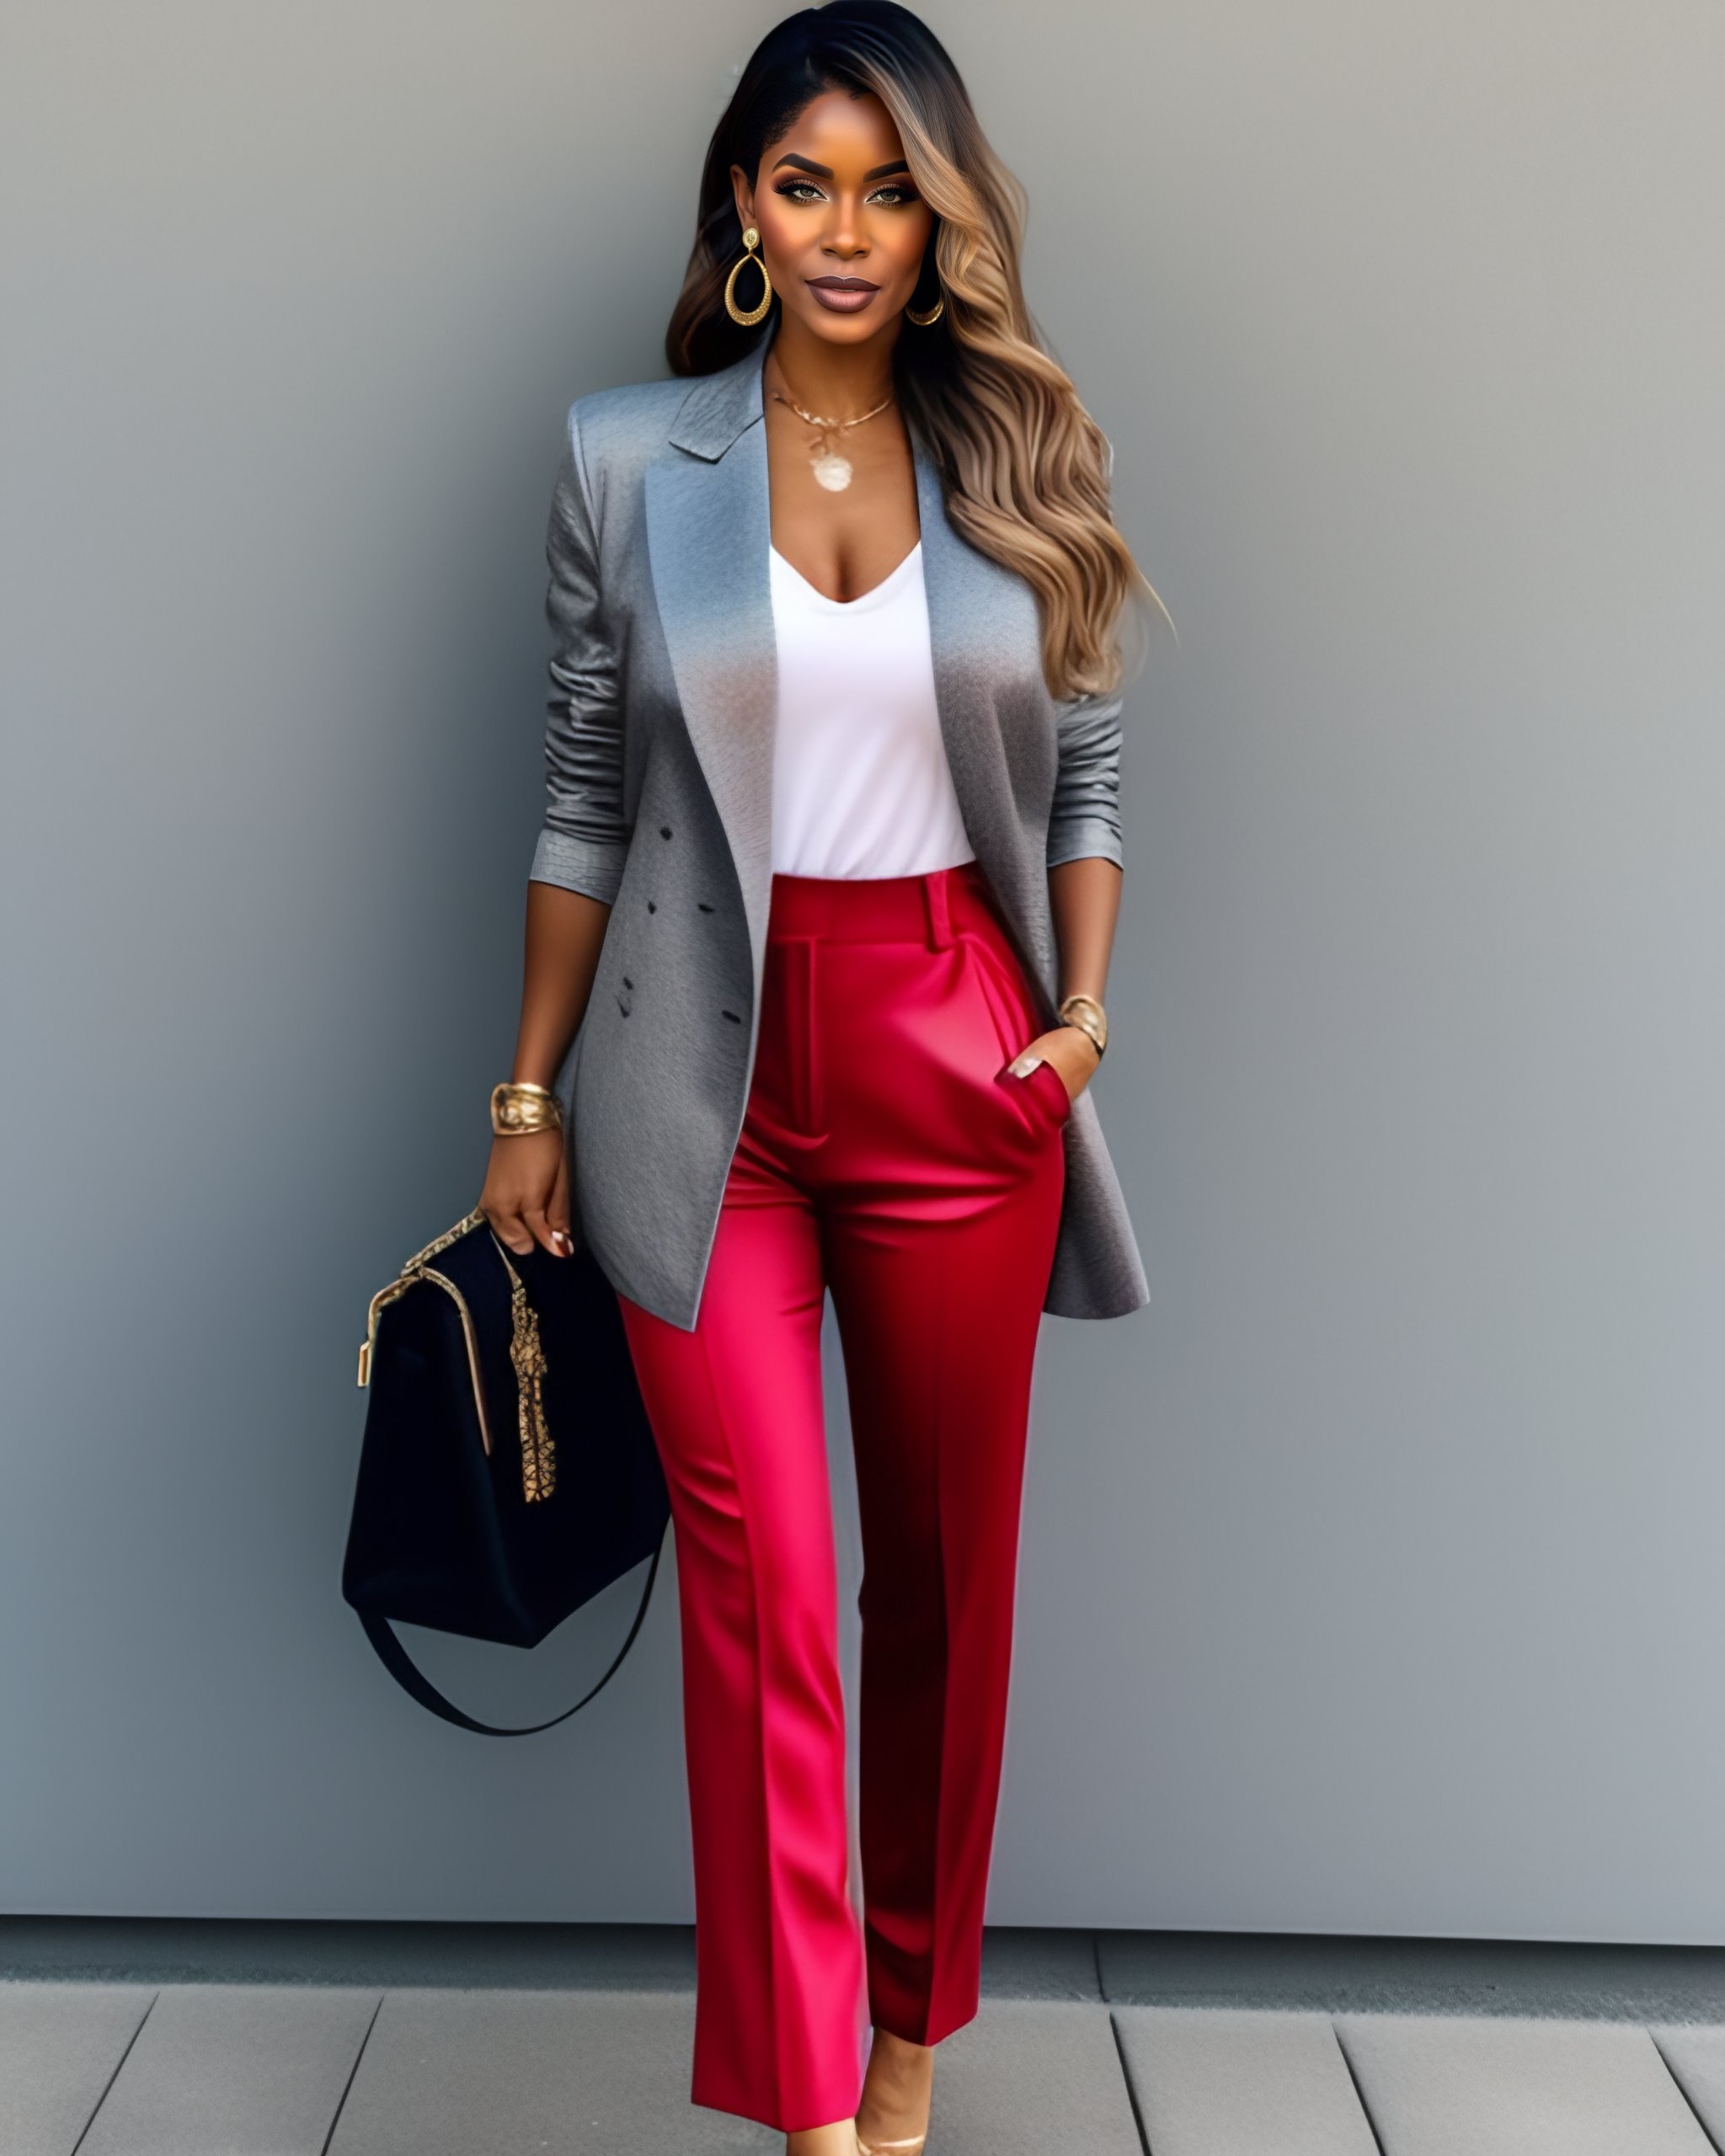 Lexica - A young american woman wearing a large grey blazer, a silver tank  top, high-waisted black trousers, golden earrings, red heels and carrying